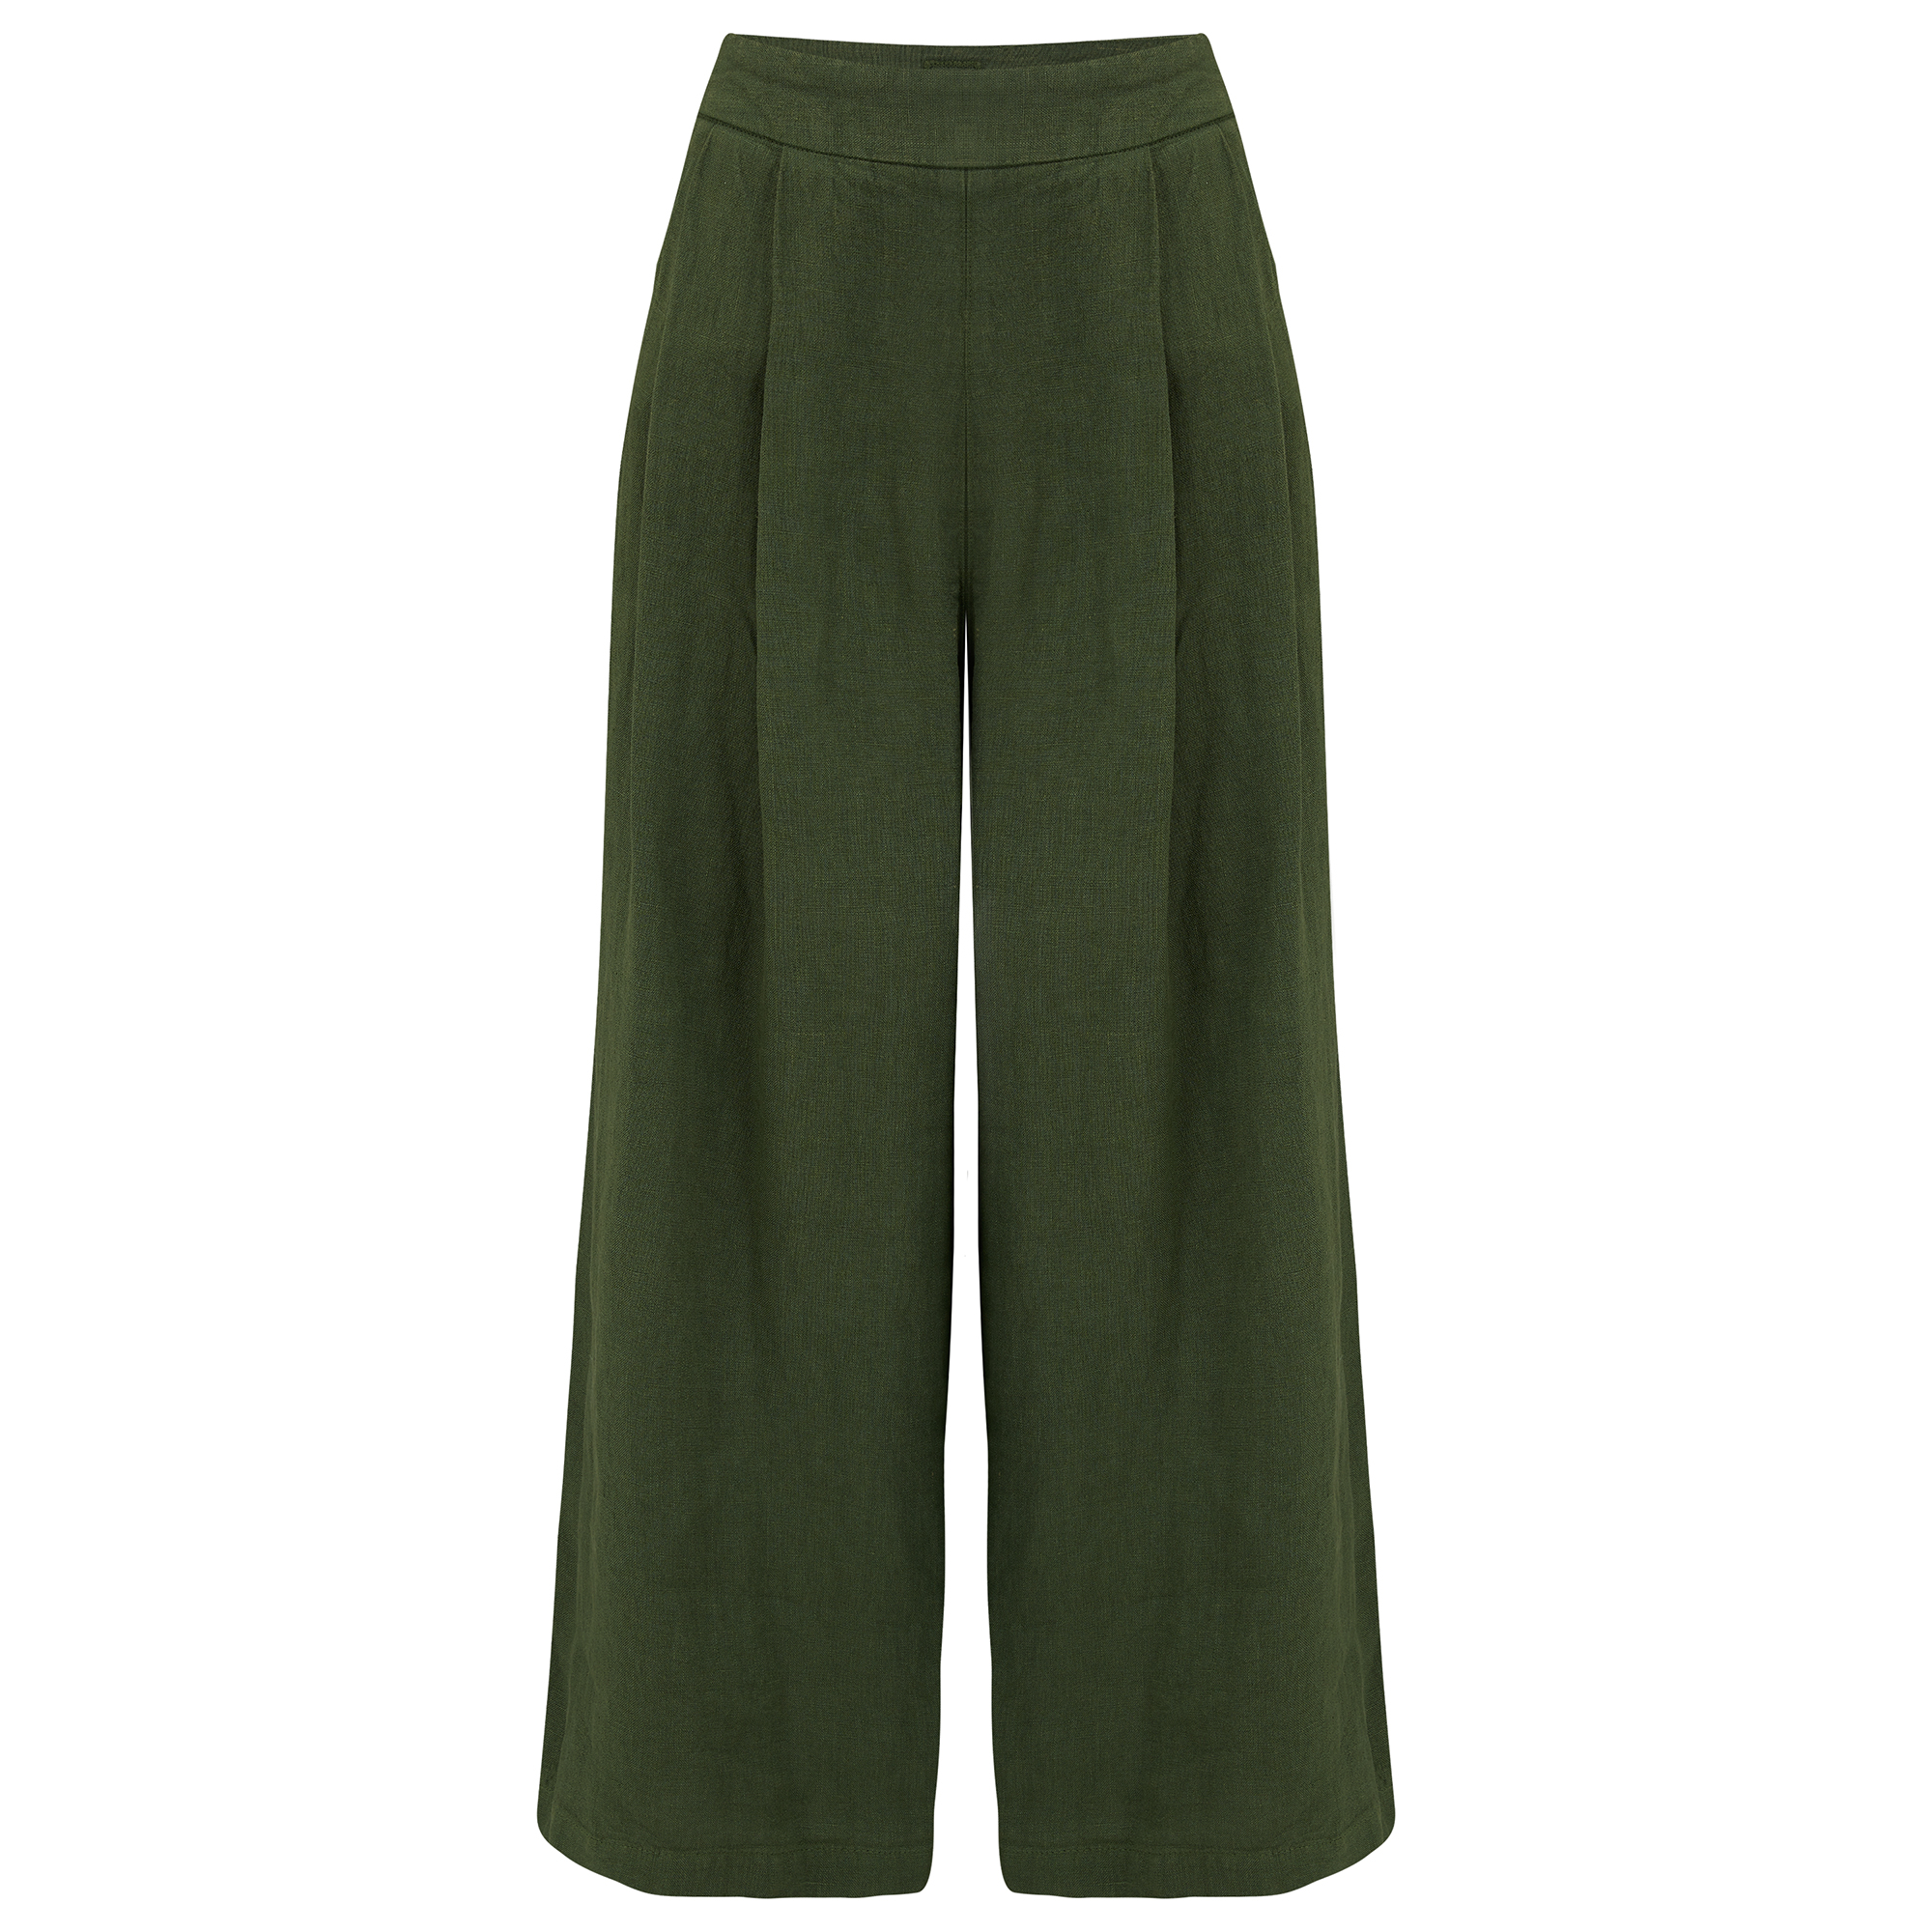 120% Lino Trouser in Army